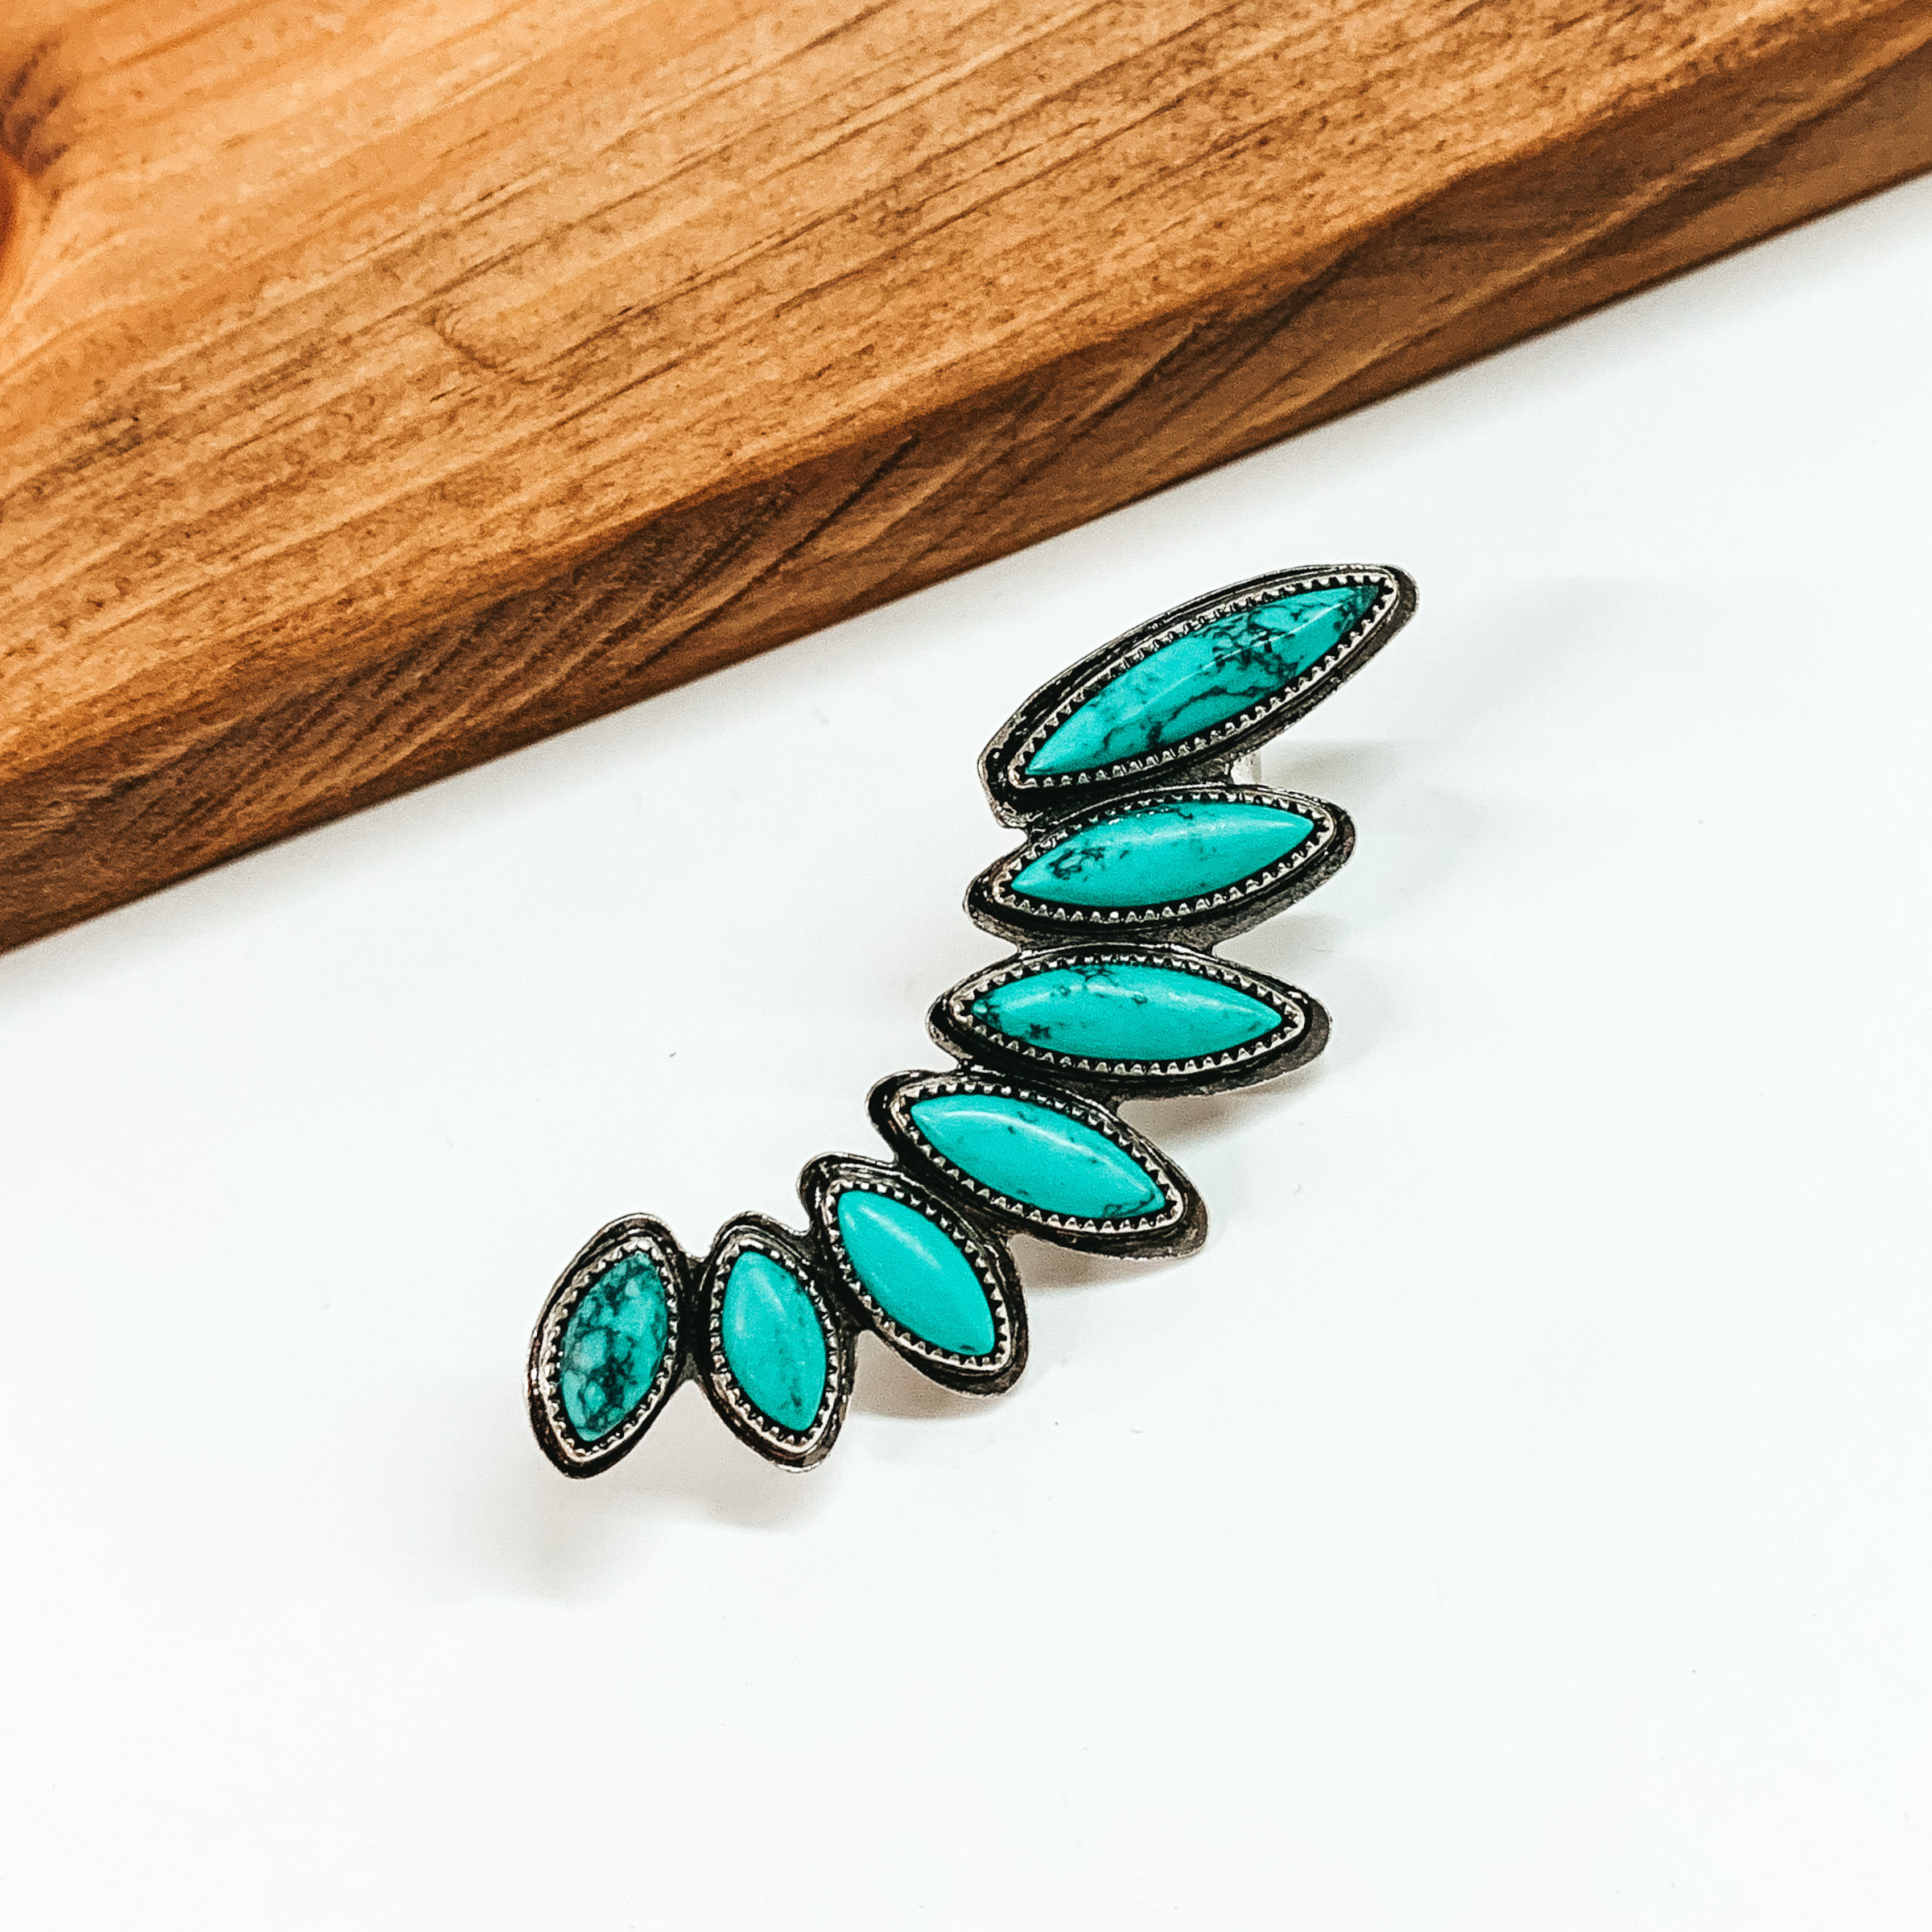 Beyond Obsessed Silver Tone Earring Cuff with Faux Stones in Turquoise - Giddy Up Glamour Boutique